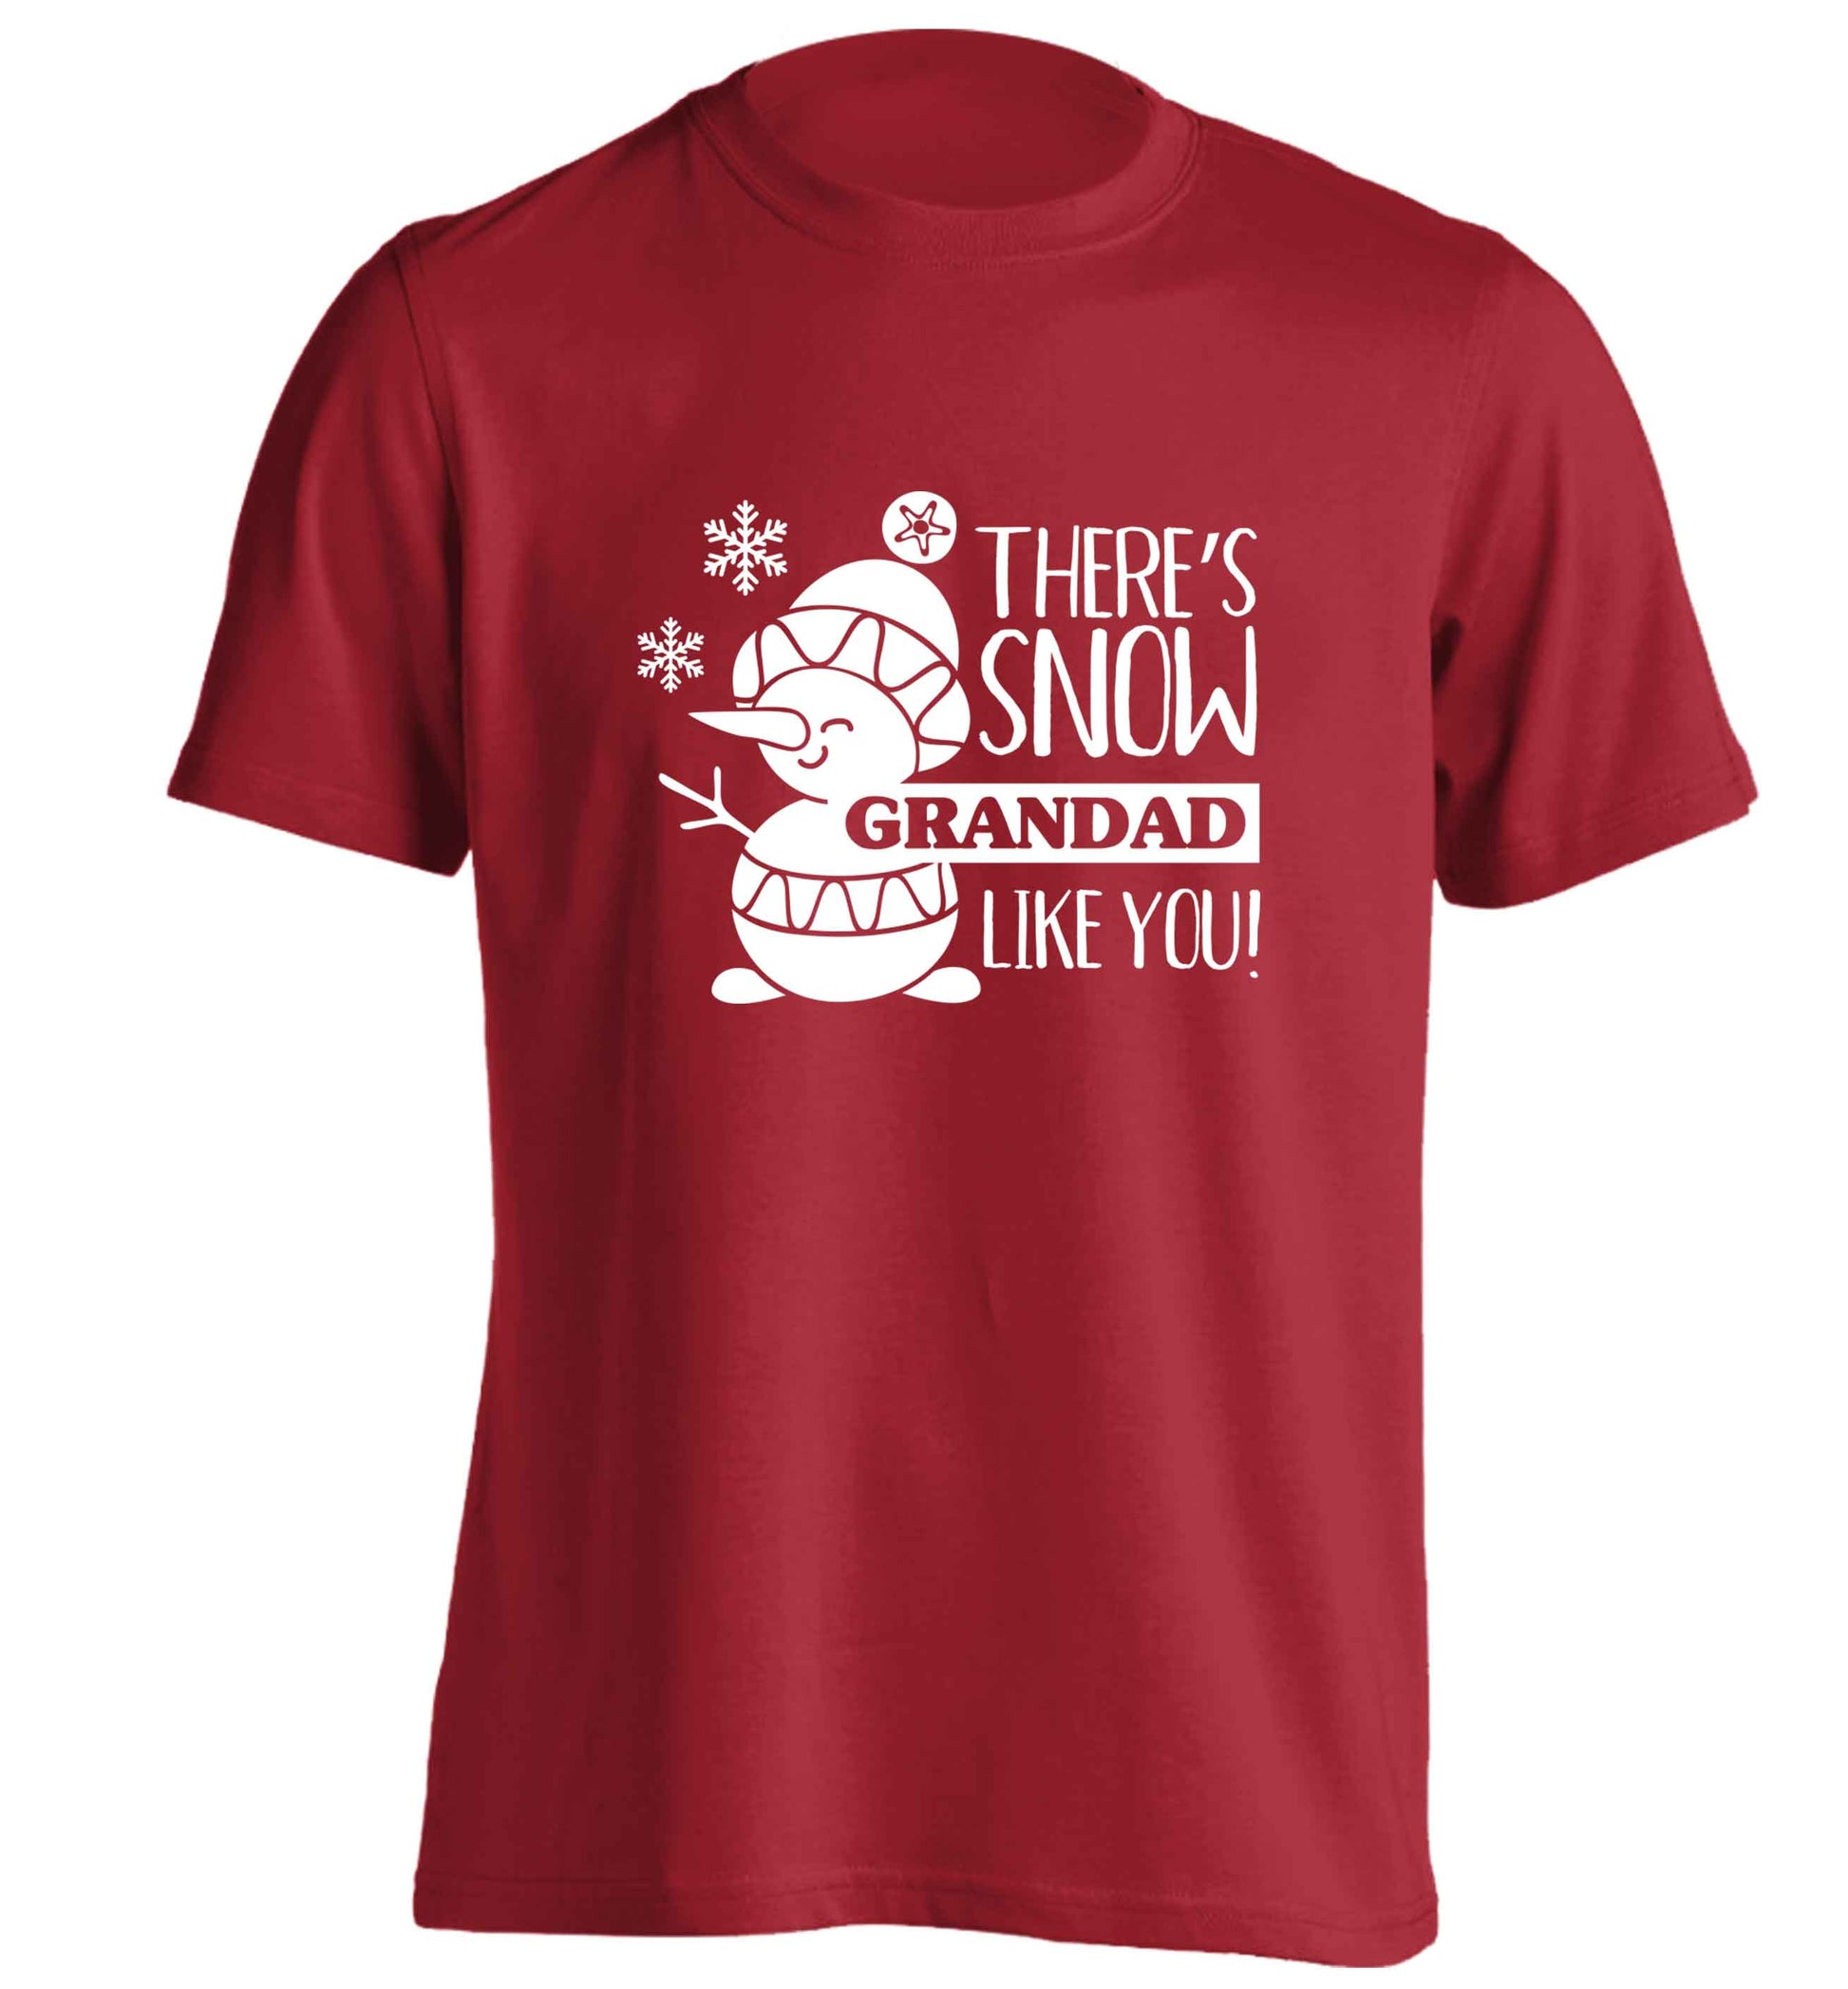 There's snow grandad like you adults unisex red Tshirt 2XL